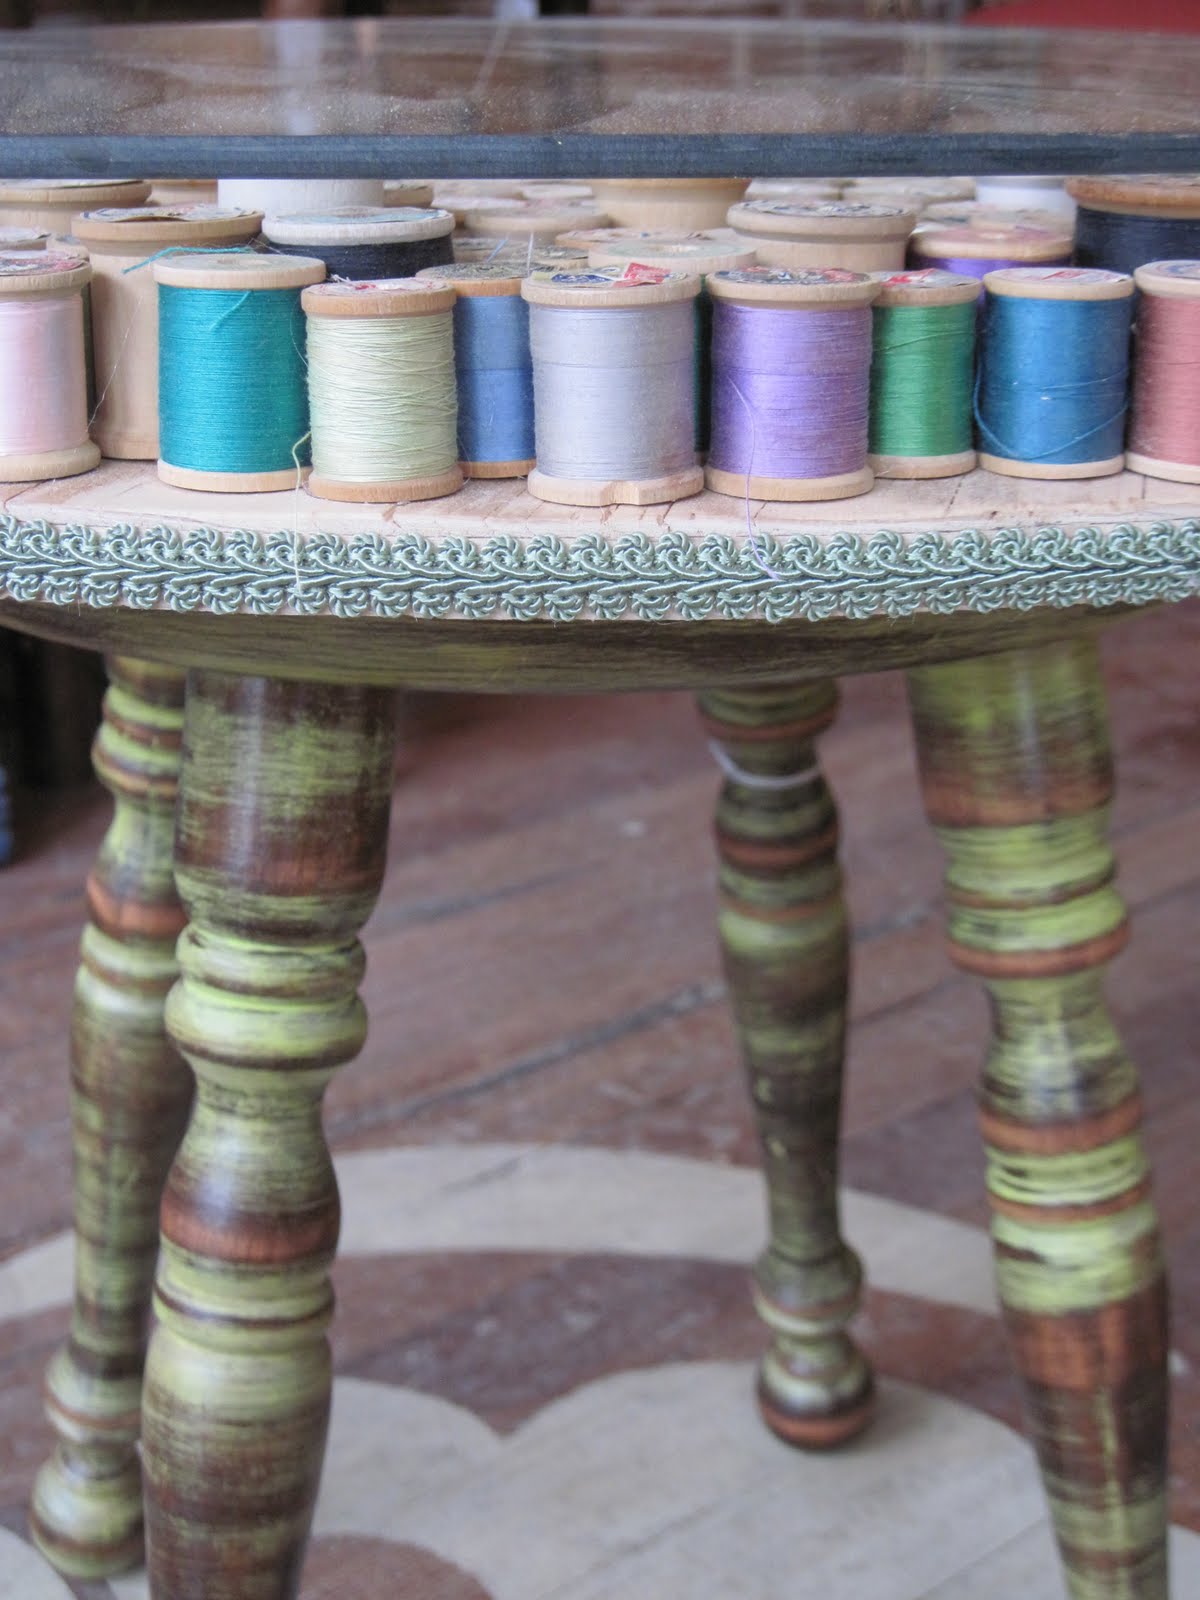 Upcycled: New Ways With Old Wooden Thread Spools  Wooden spool crafts, Spool  crafts, Pin cushions patterns